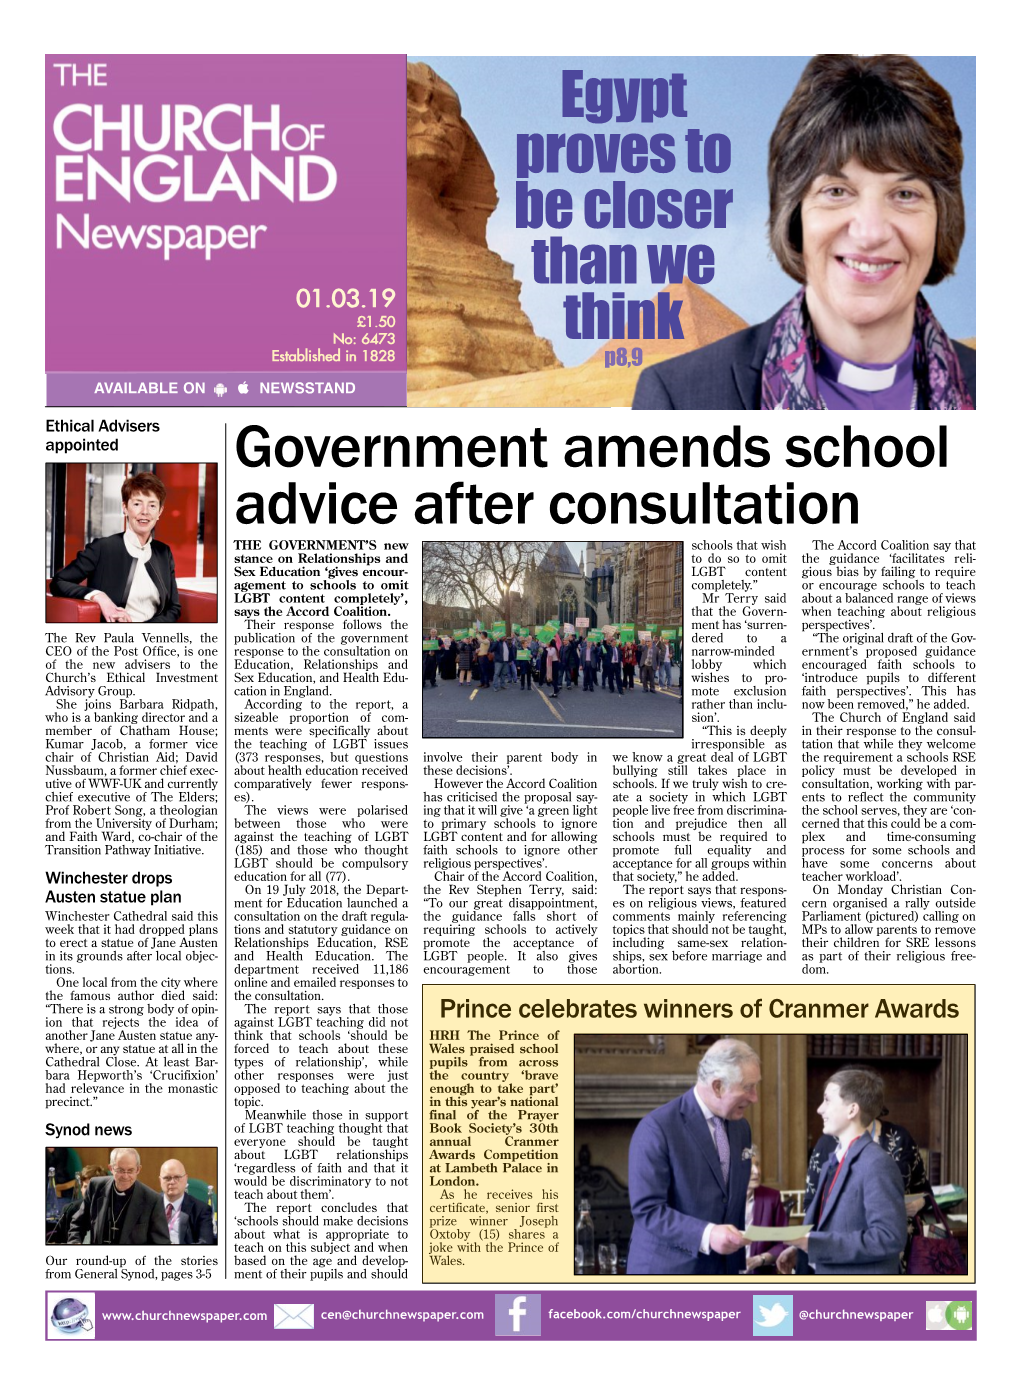 Government Amends School Advice After Consultation